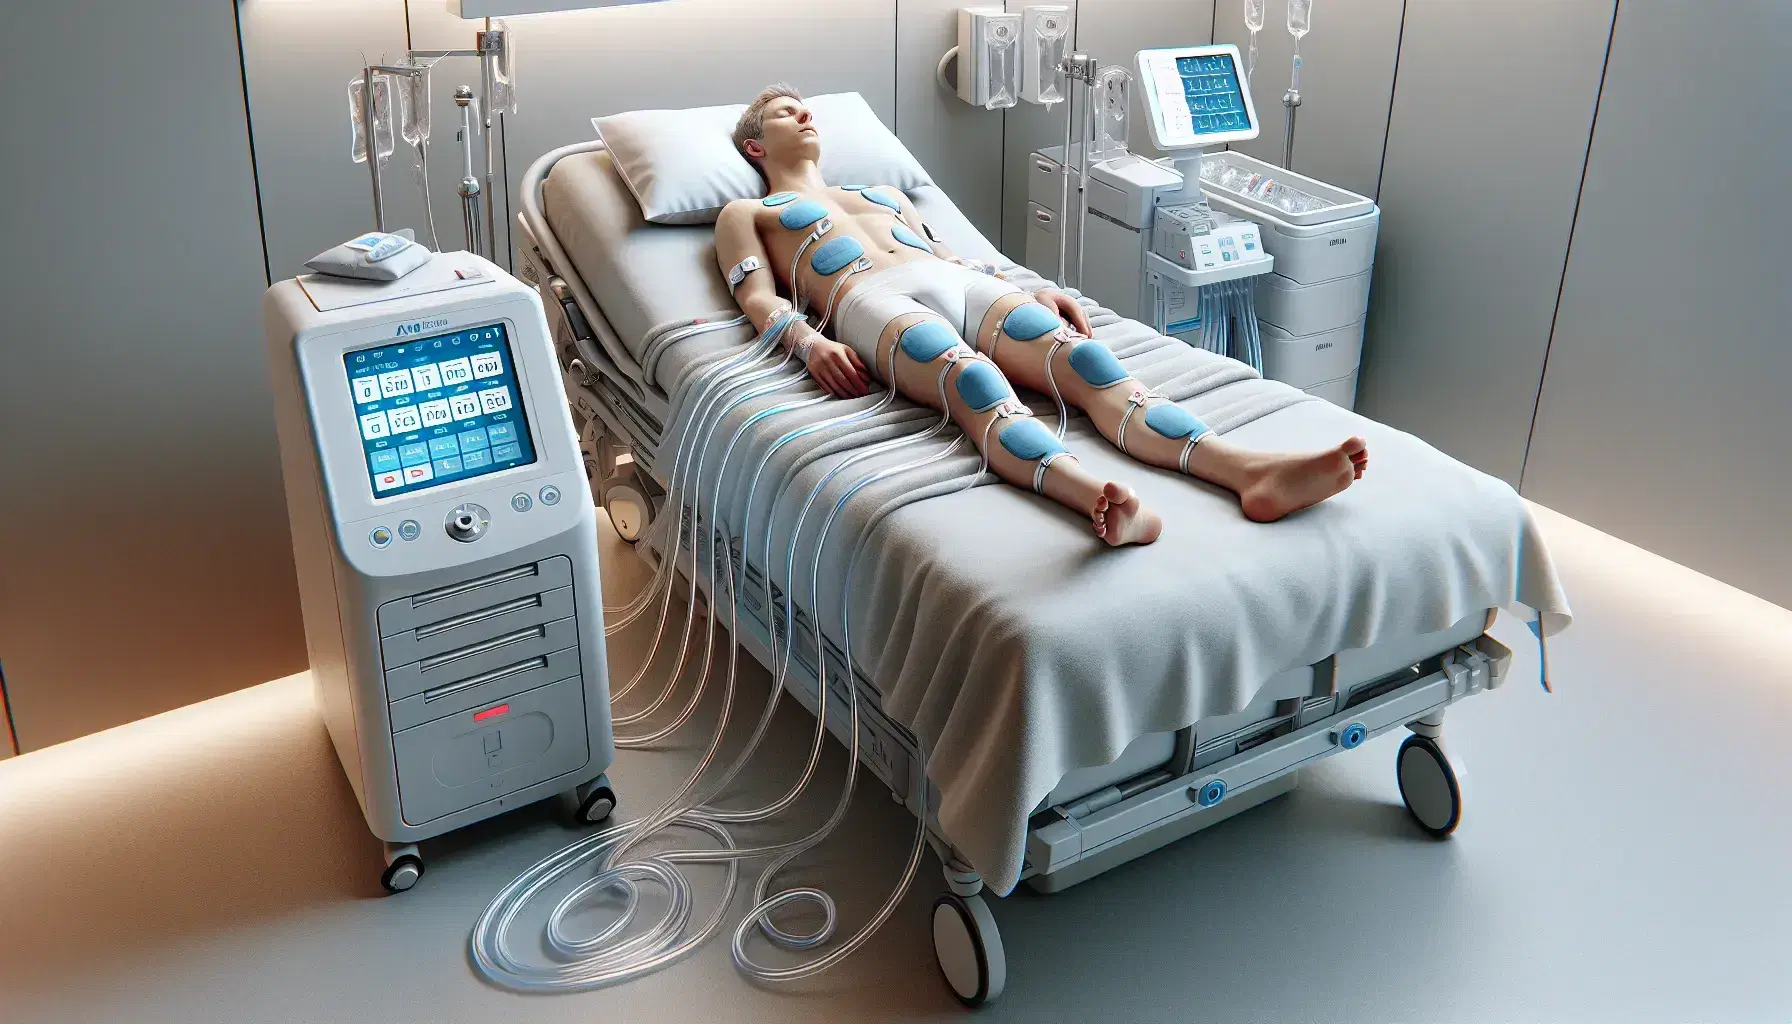 Patient on hospital bed connected to Arctic Sun temperature management system with blue pads and control unit.